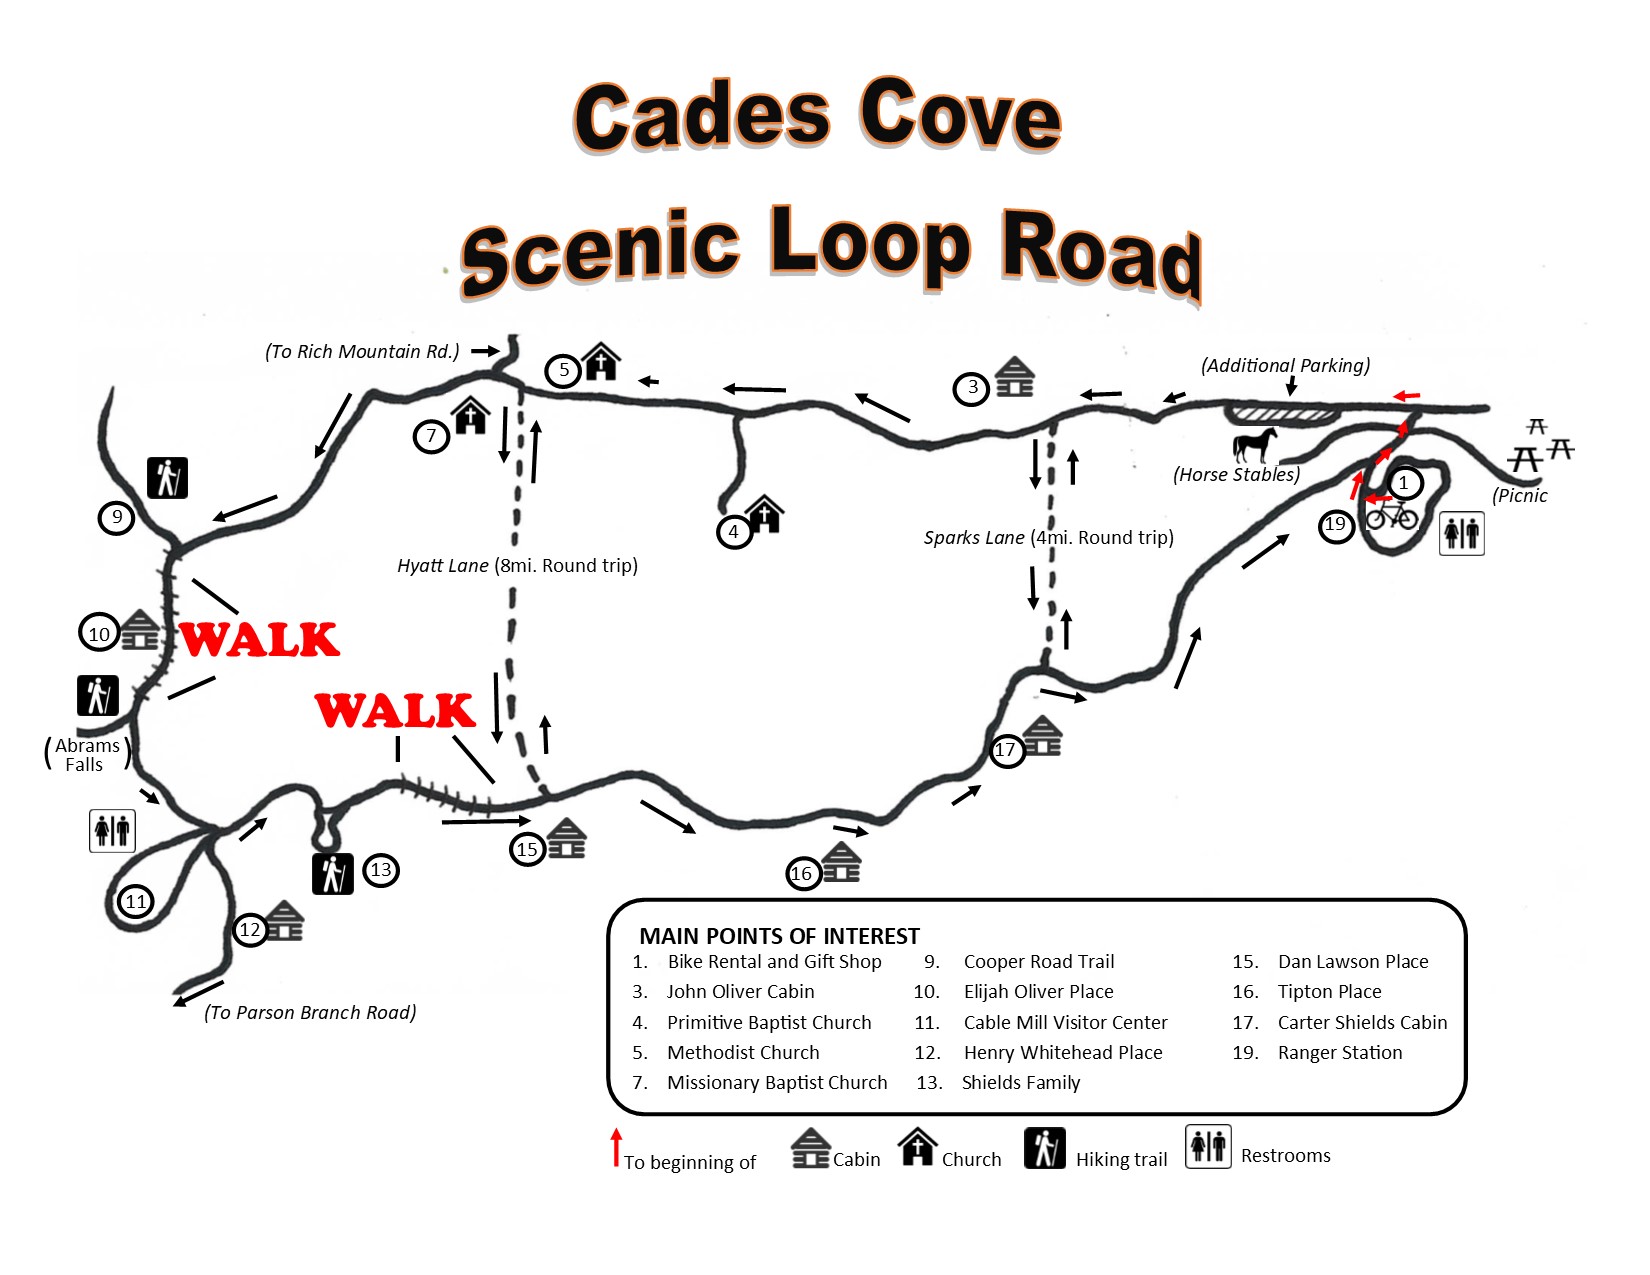 Cades Cove Scenic Loop Map. The map holds points of interests and paths to take for walking, biking and running.